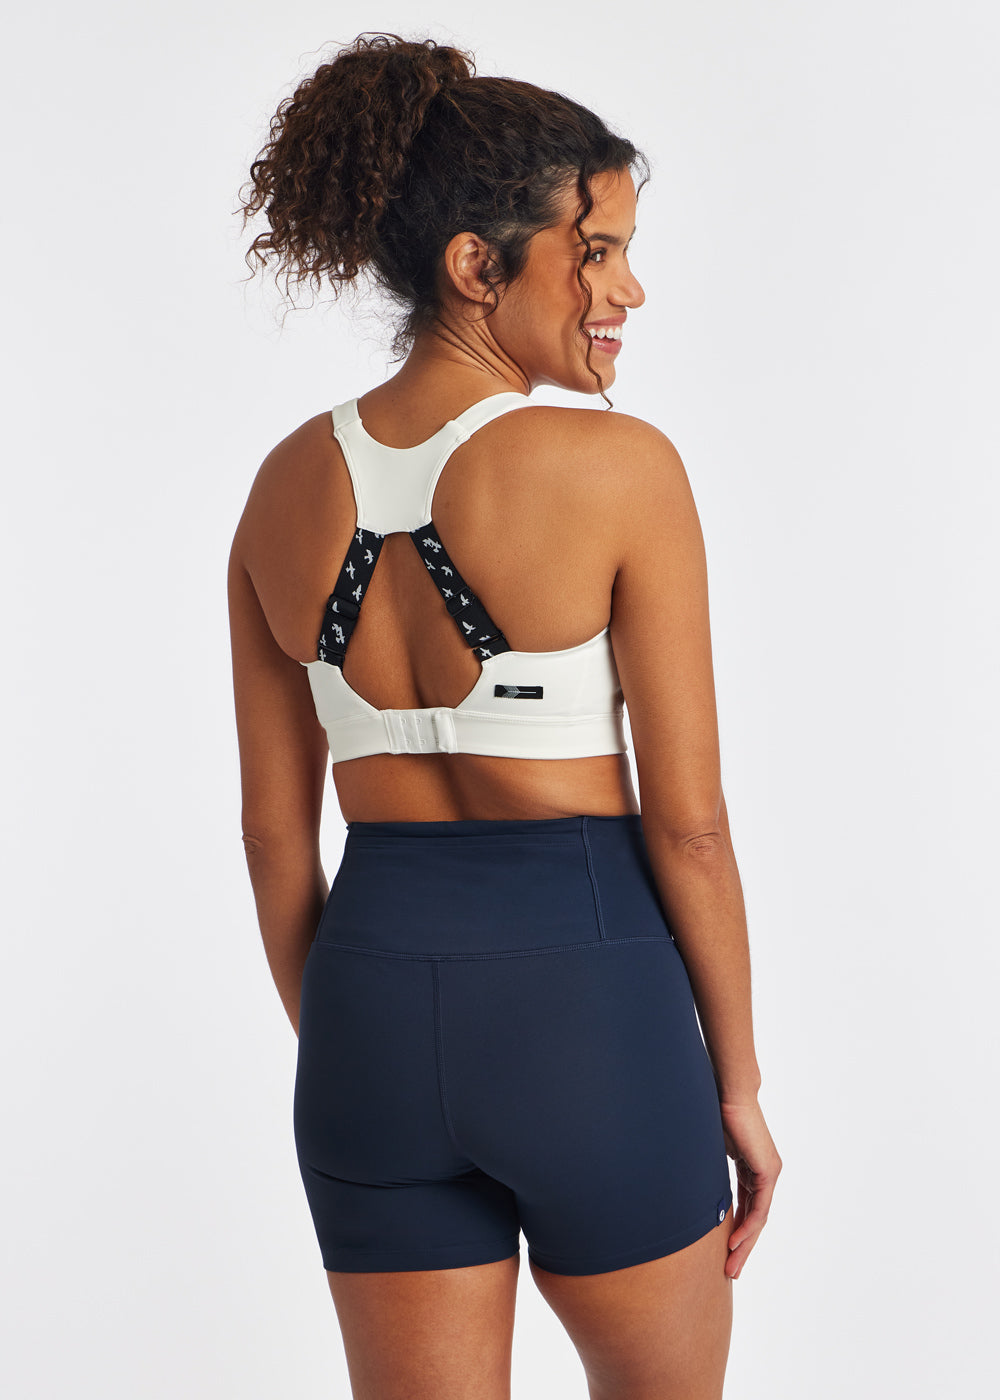 lululemon - Our most supportive bra ever, now comes with a front